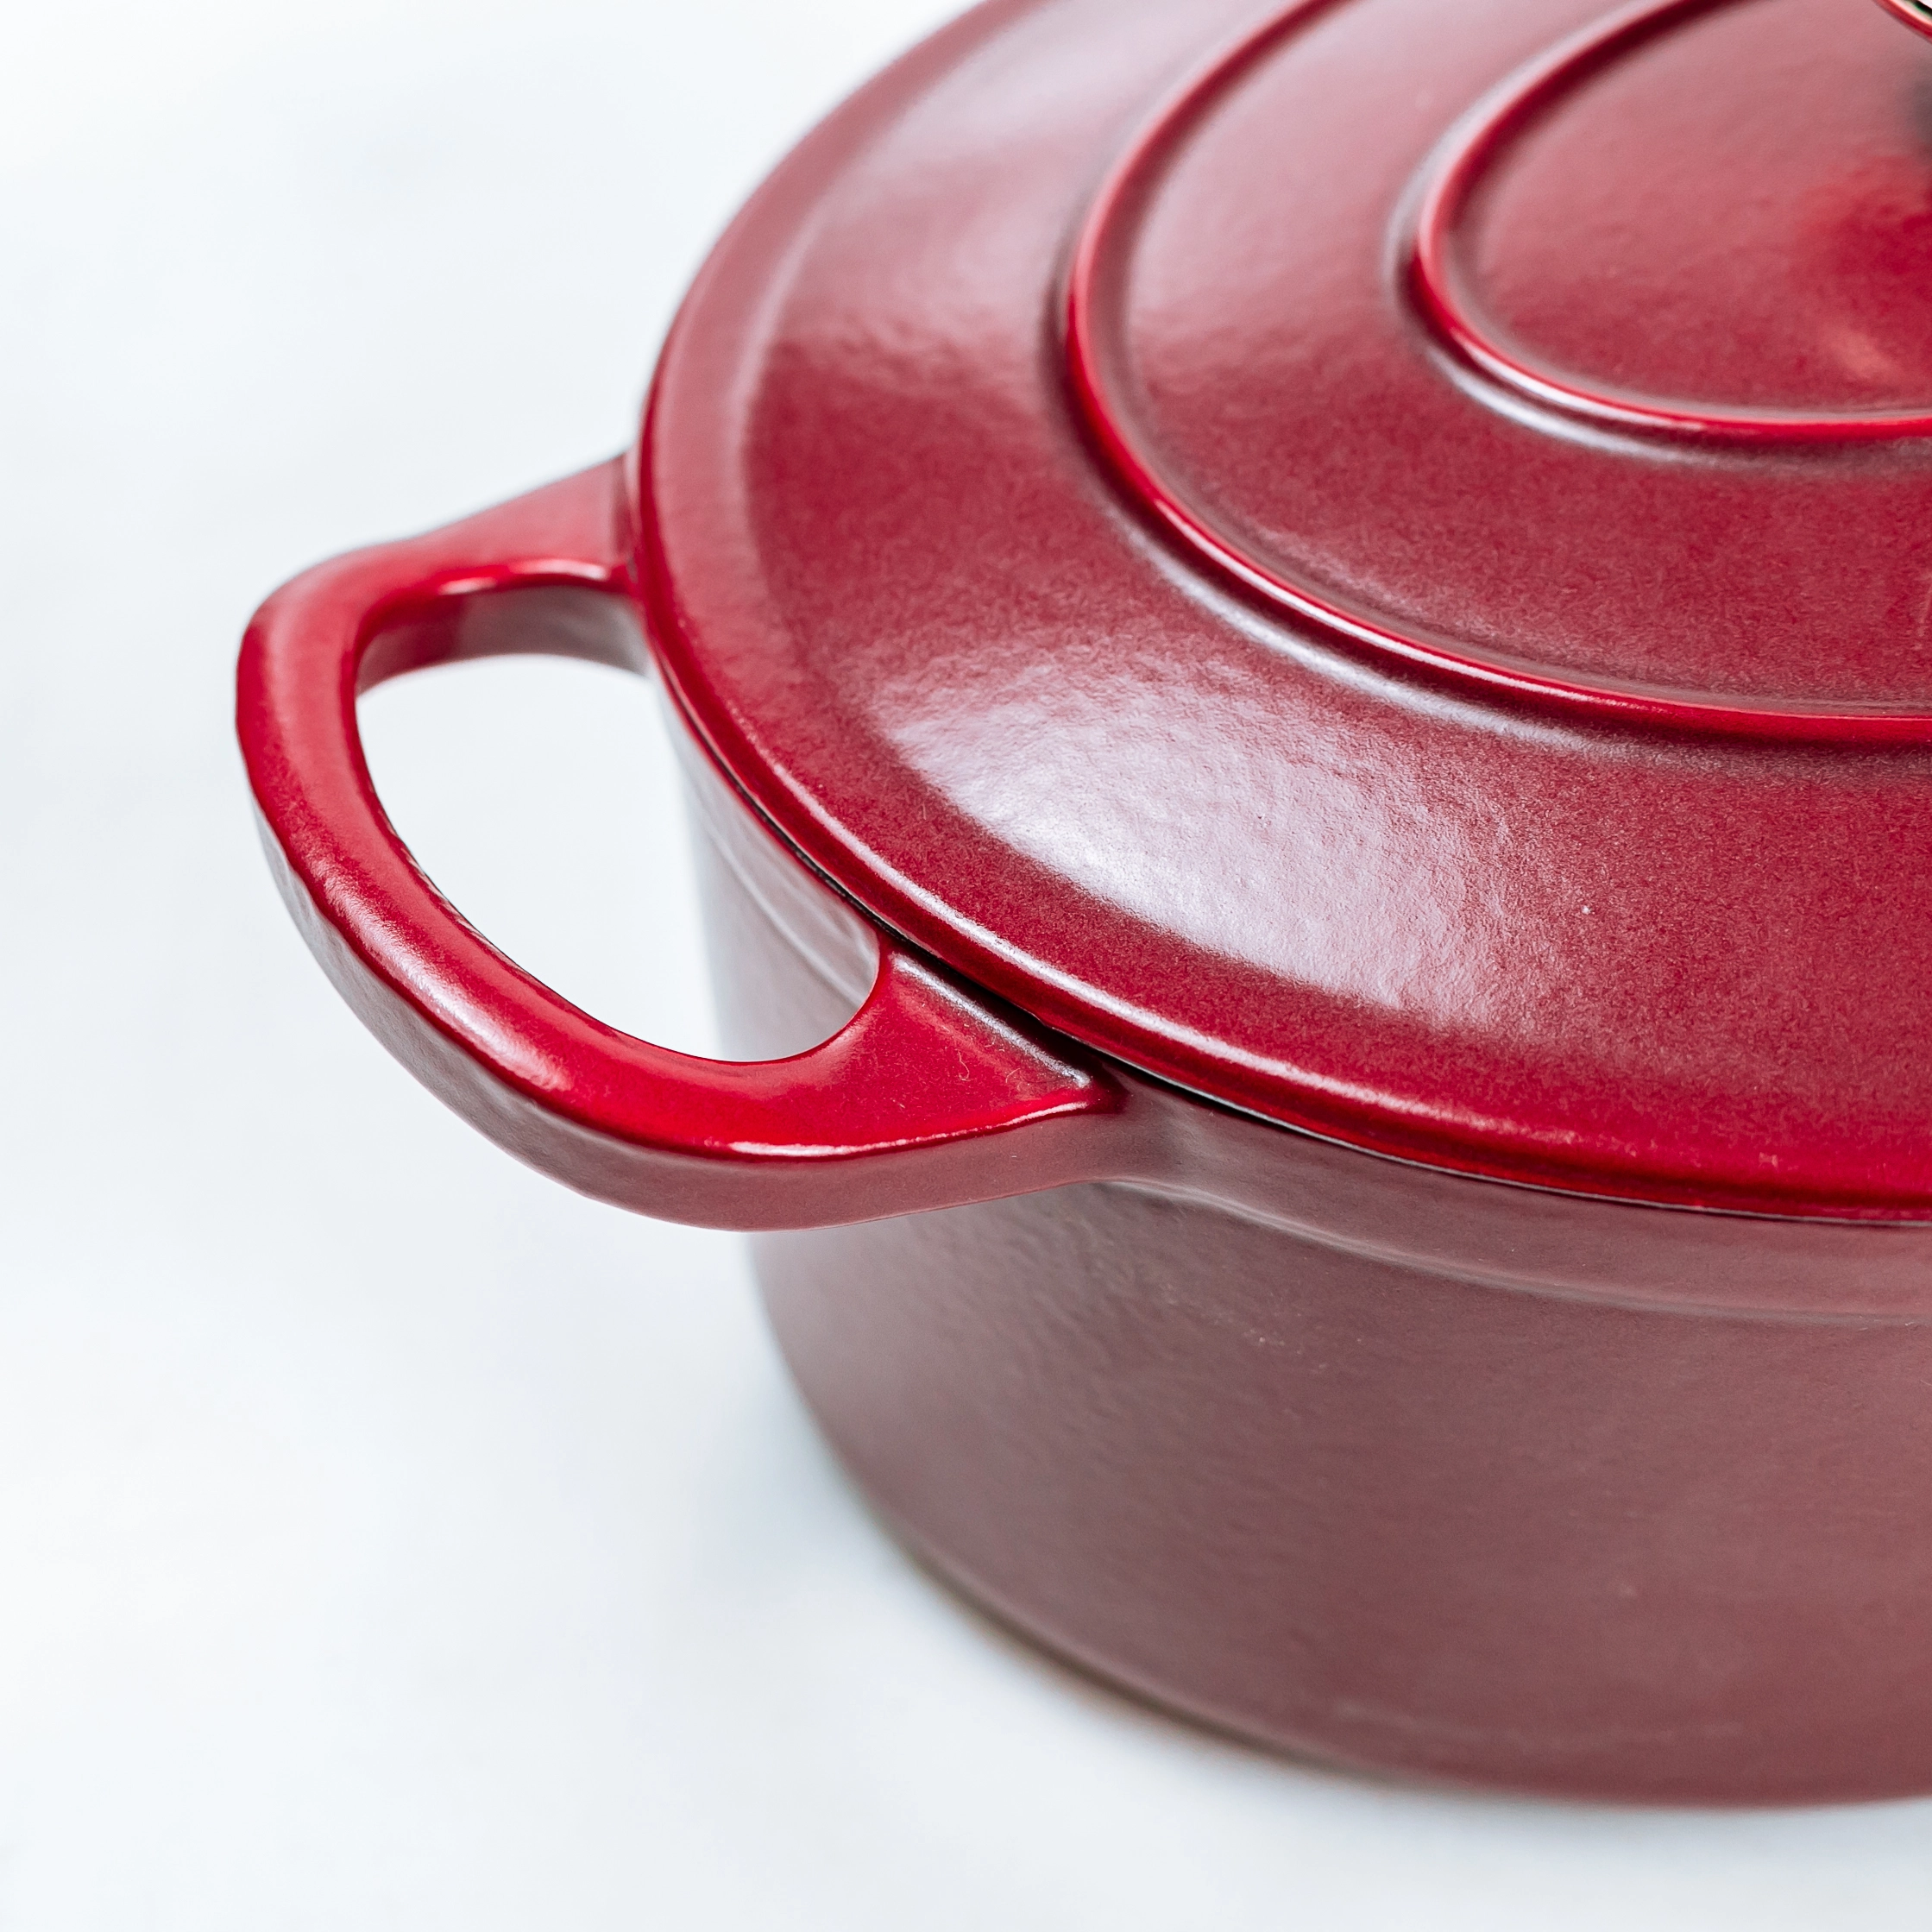 Red Enamel Oval 4.8Qt Cast Iron Dutch Oven for Cooking